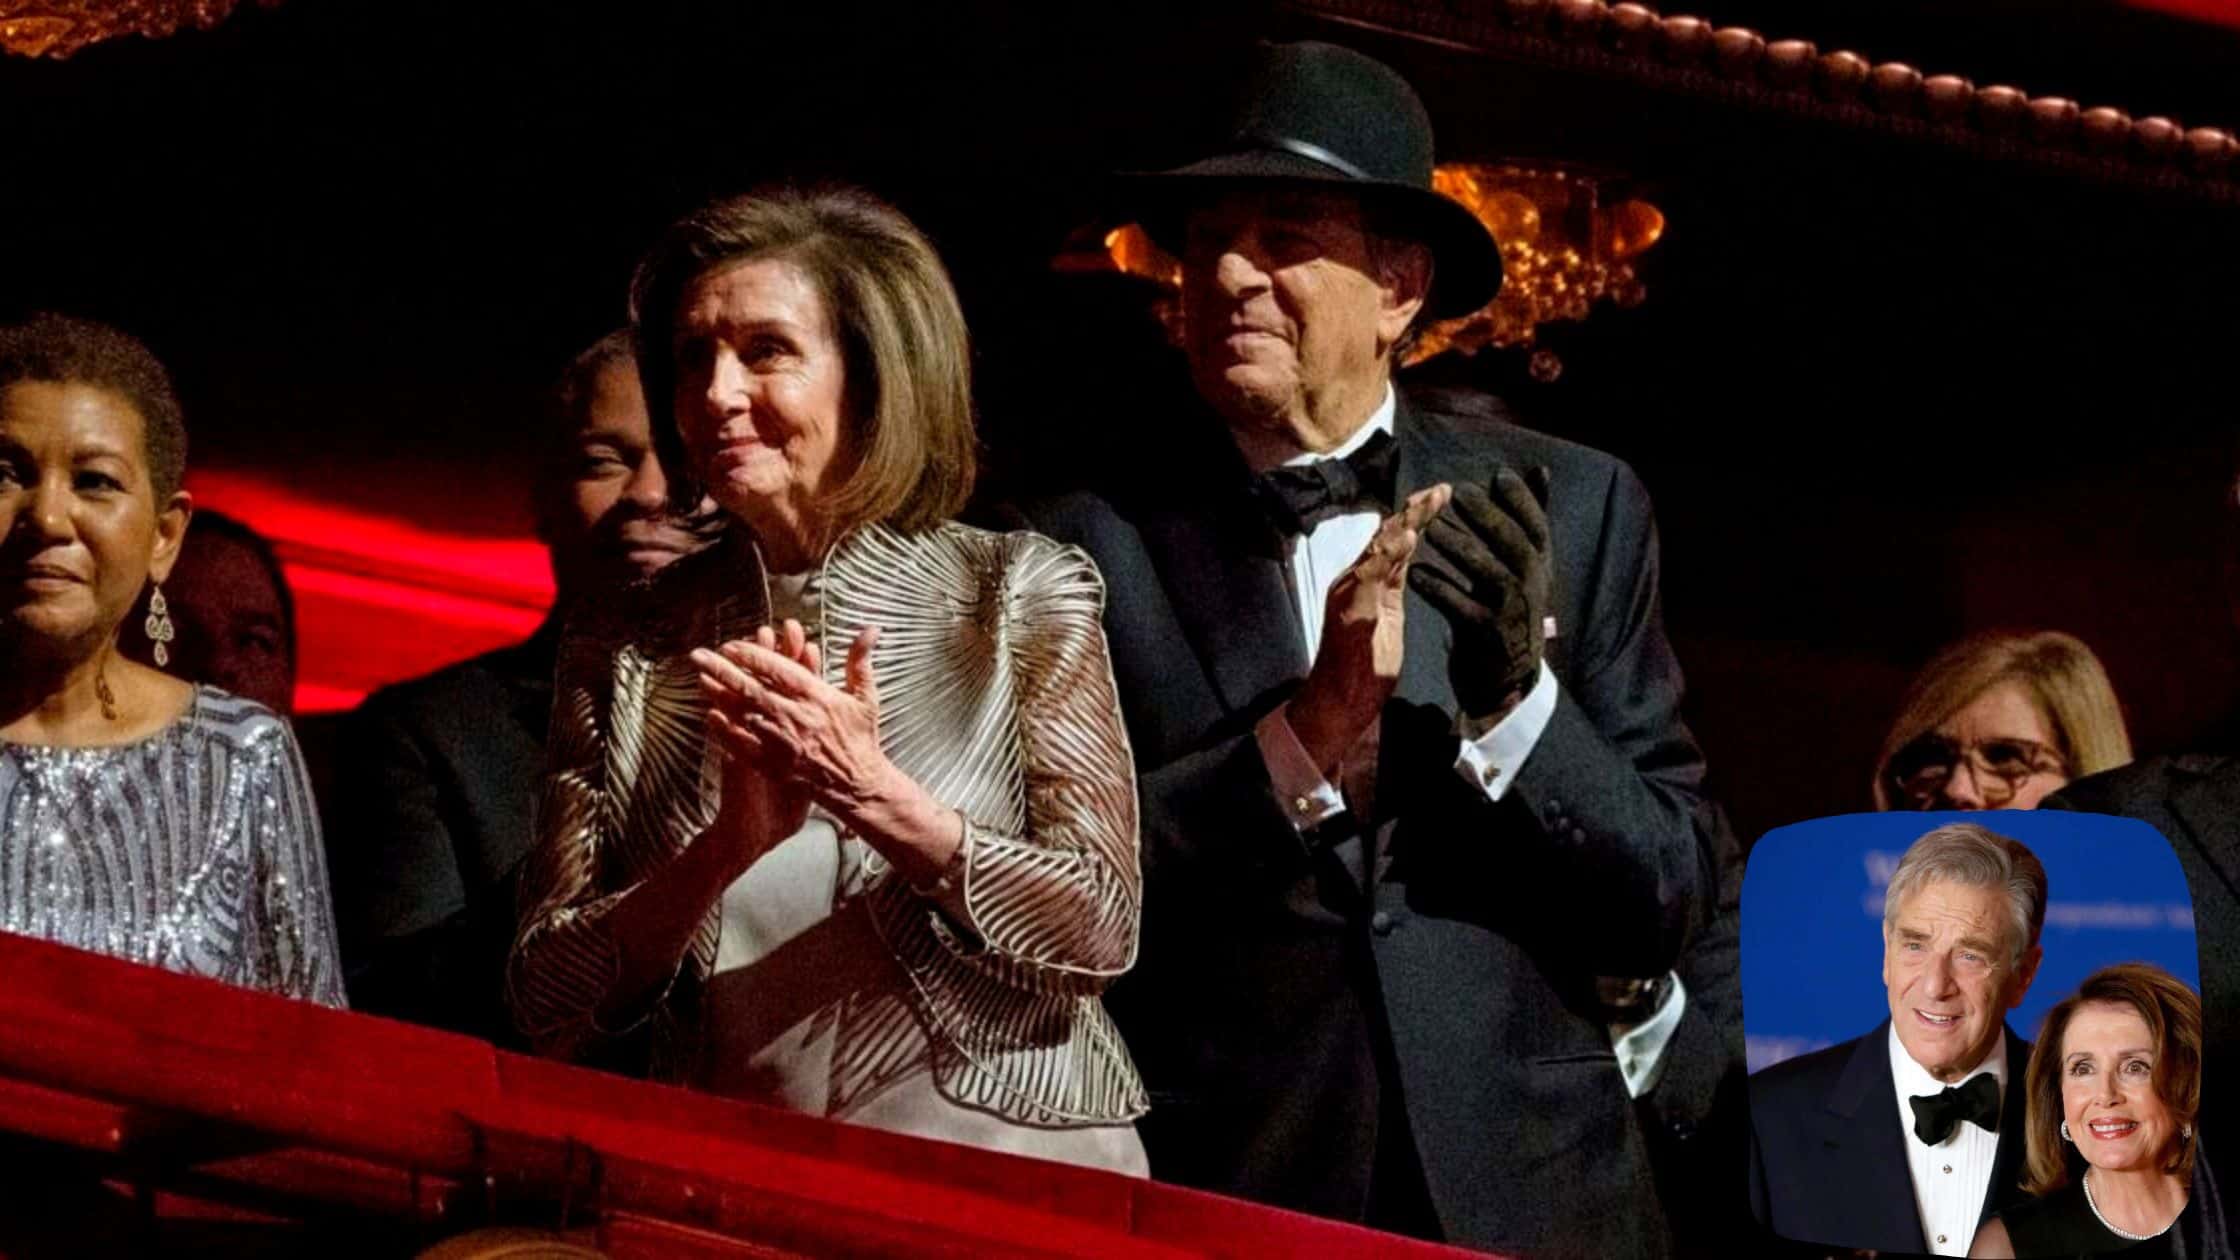 First Public Appearance Since Attack Paul Pelosi Attends Kennedy Center Honors